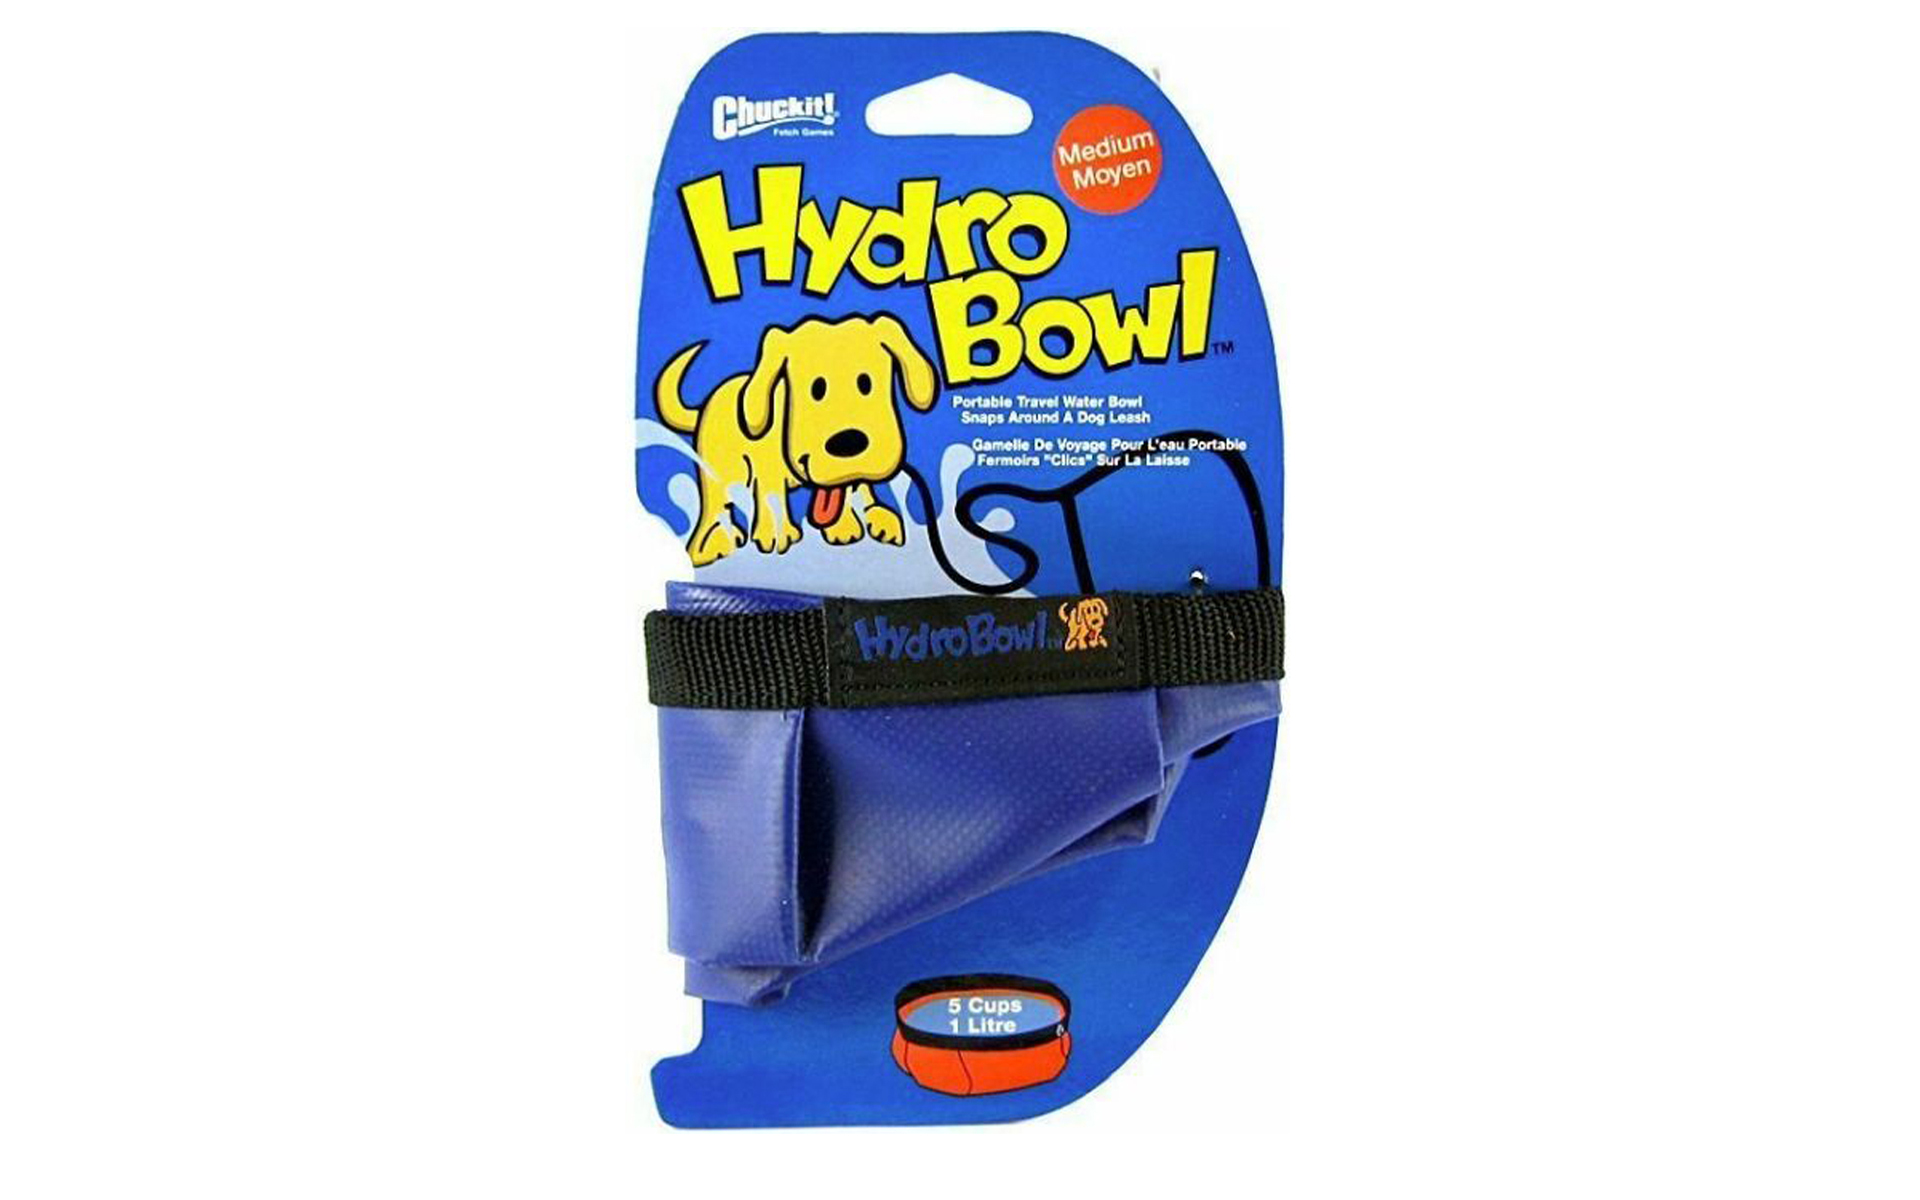 Hydro-Bowl Travel Water Bowl, Medium - Holds 5 Cups